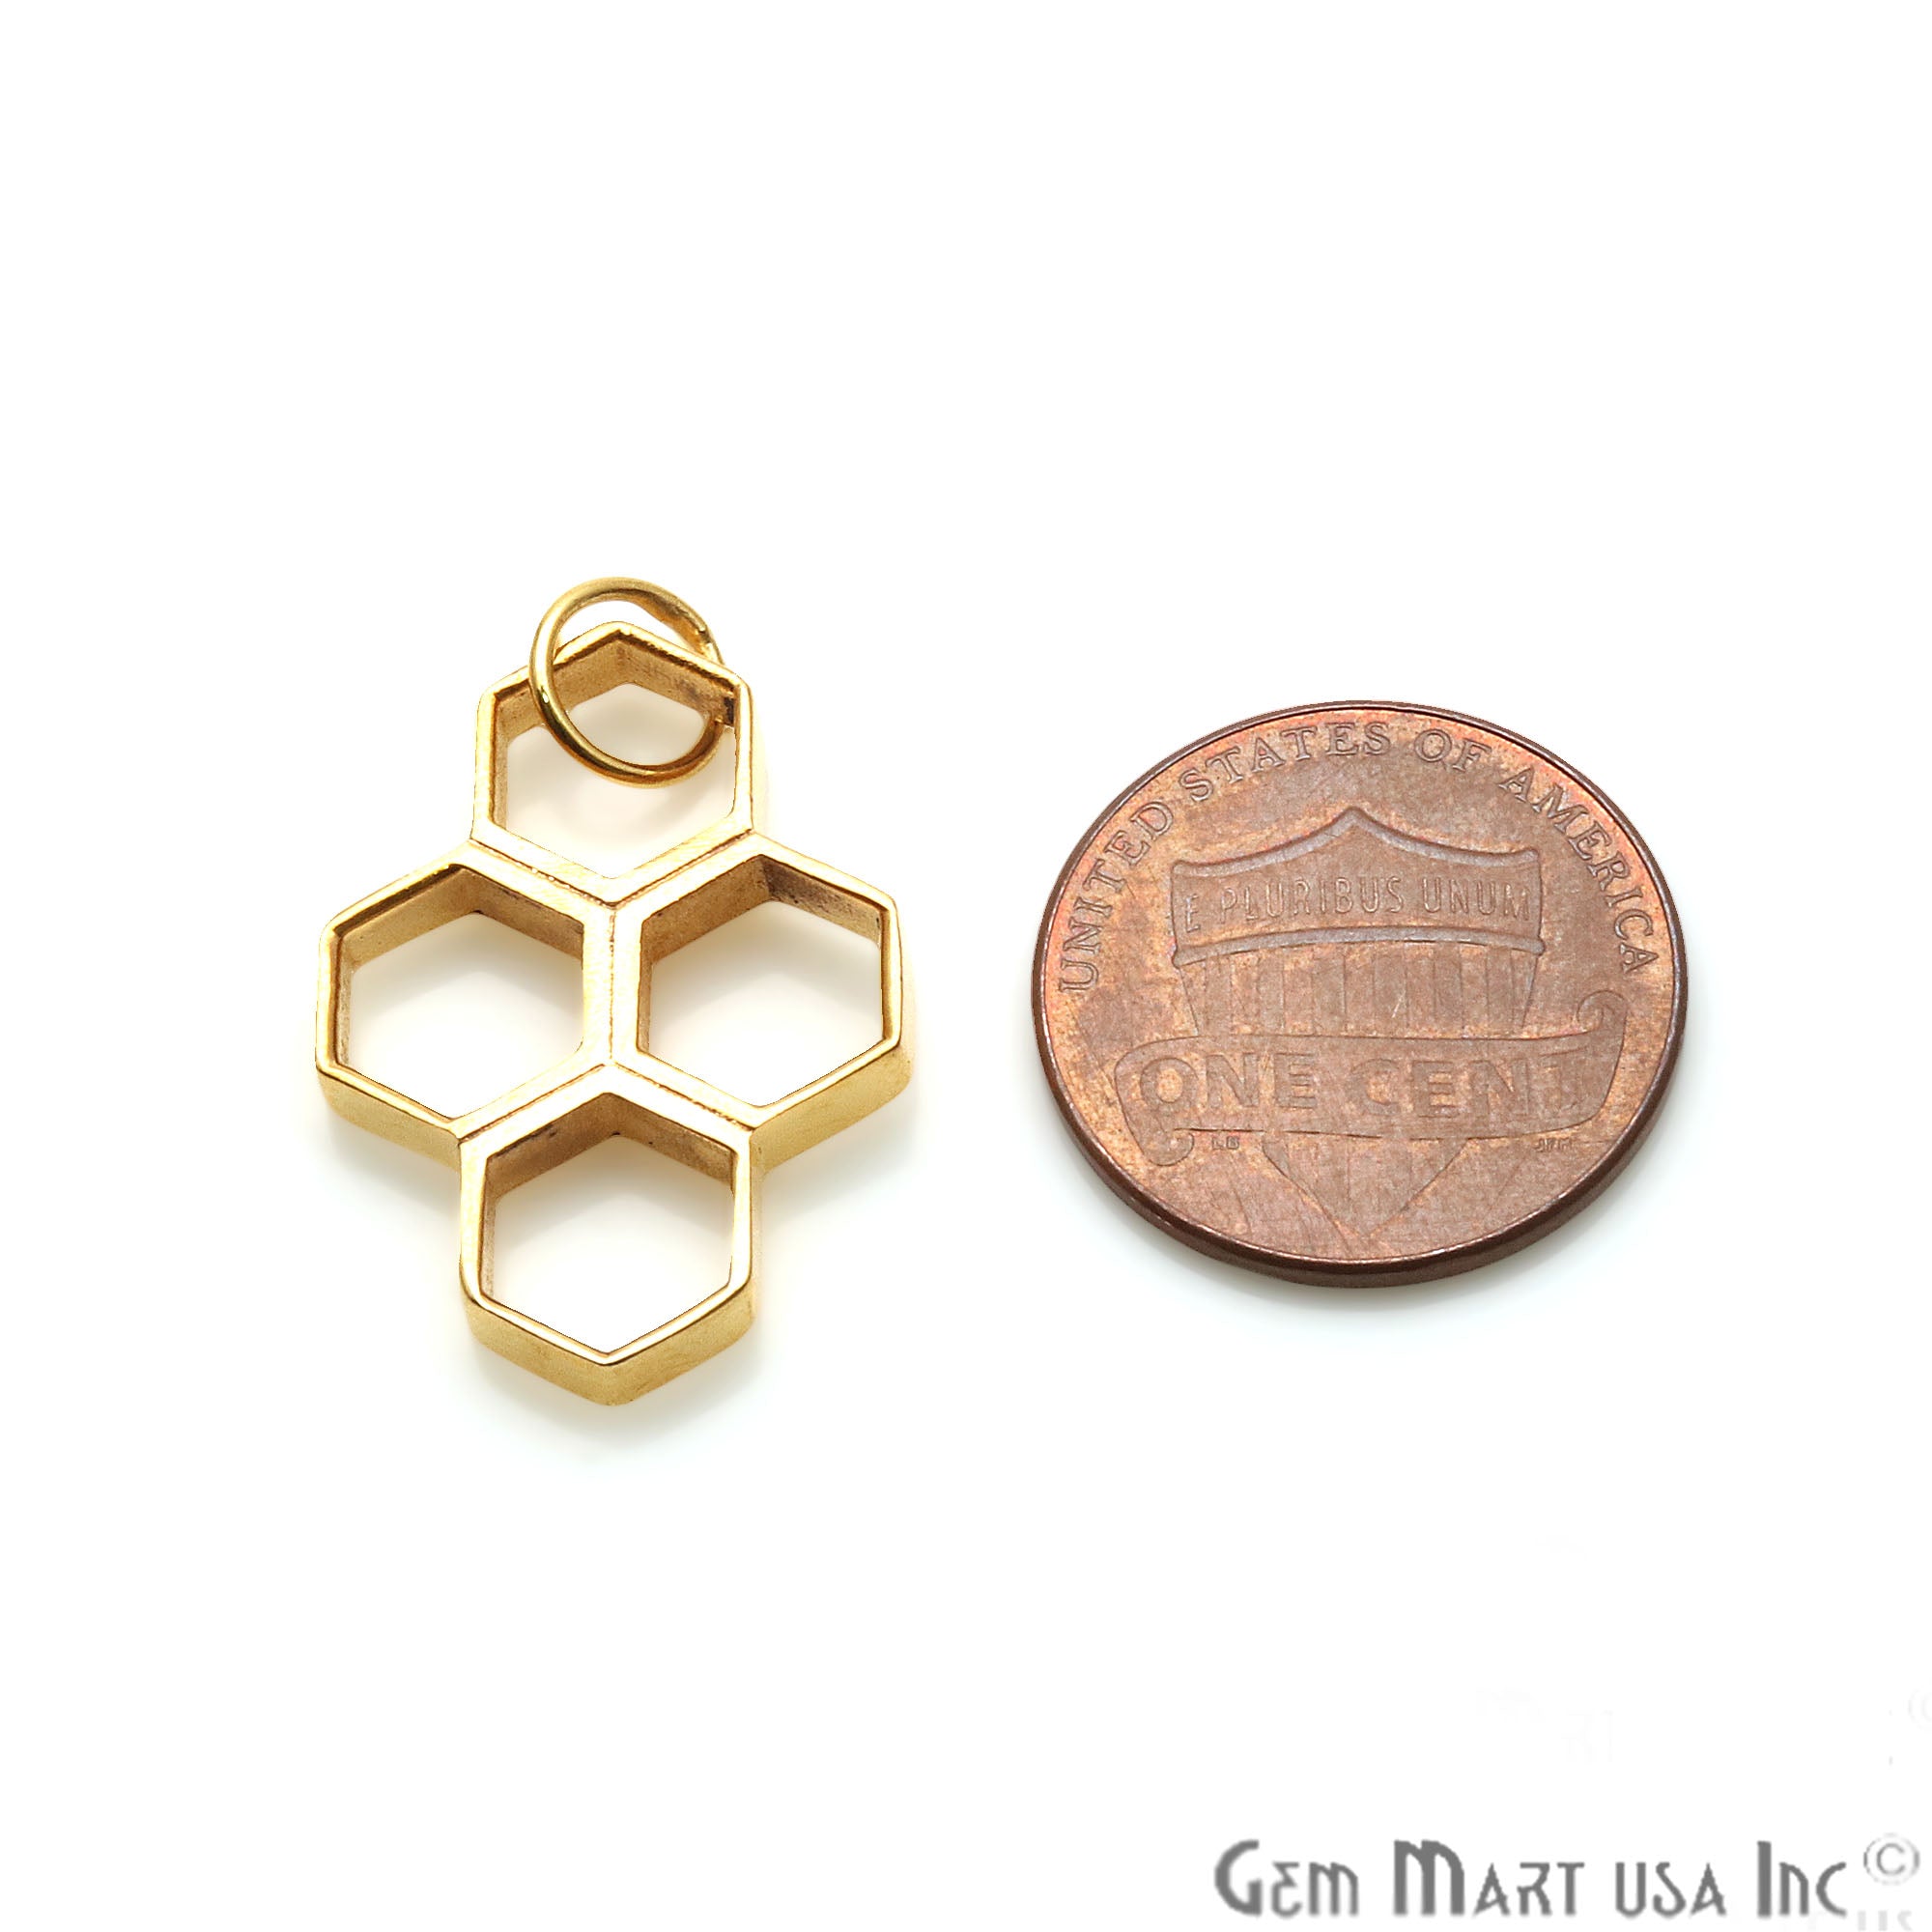 Hexagon Shaped 24x17mm Gold Plated Finding Charm, Four hexagon attached, Gold Jewelry Charm, Single Bail connector - GemMartUSA